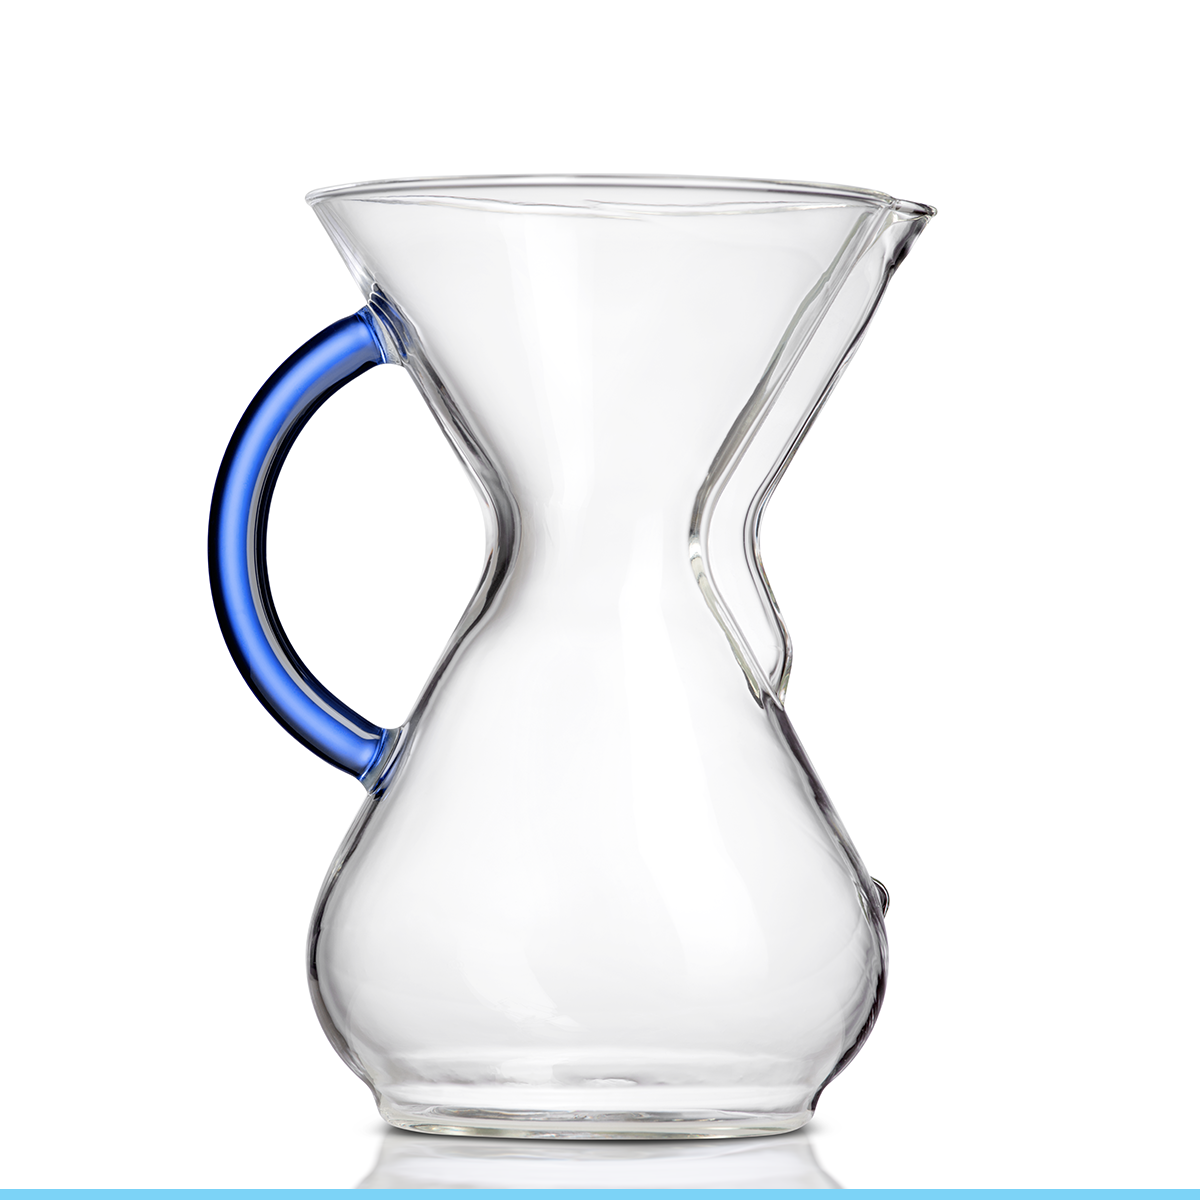 https://store.chemexcoffeemaker.com/media/catalog/product/c/o/color-glass-handle-6-cup-sapphire_2_1.png